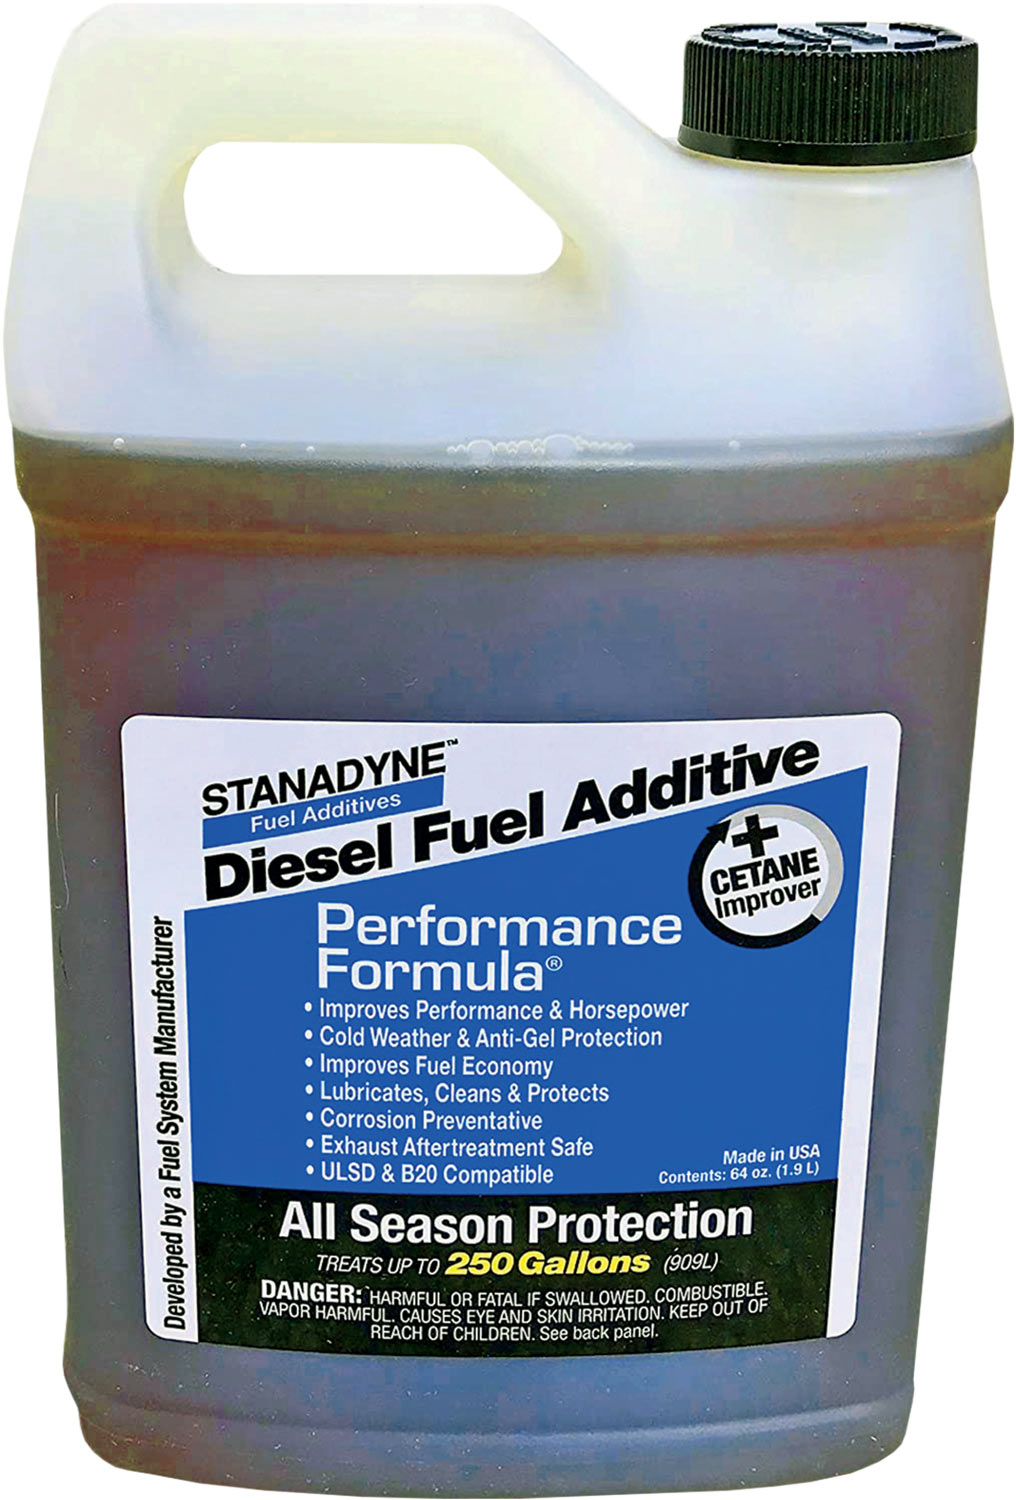 a container of Stanadyne Performance Formula